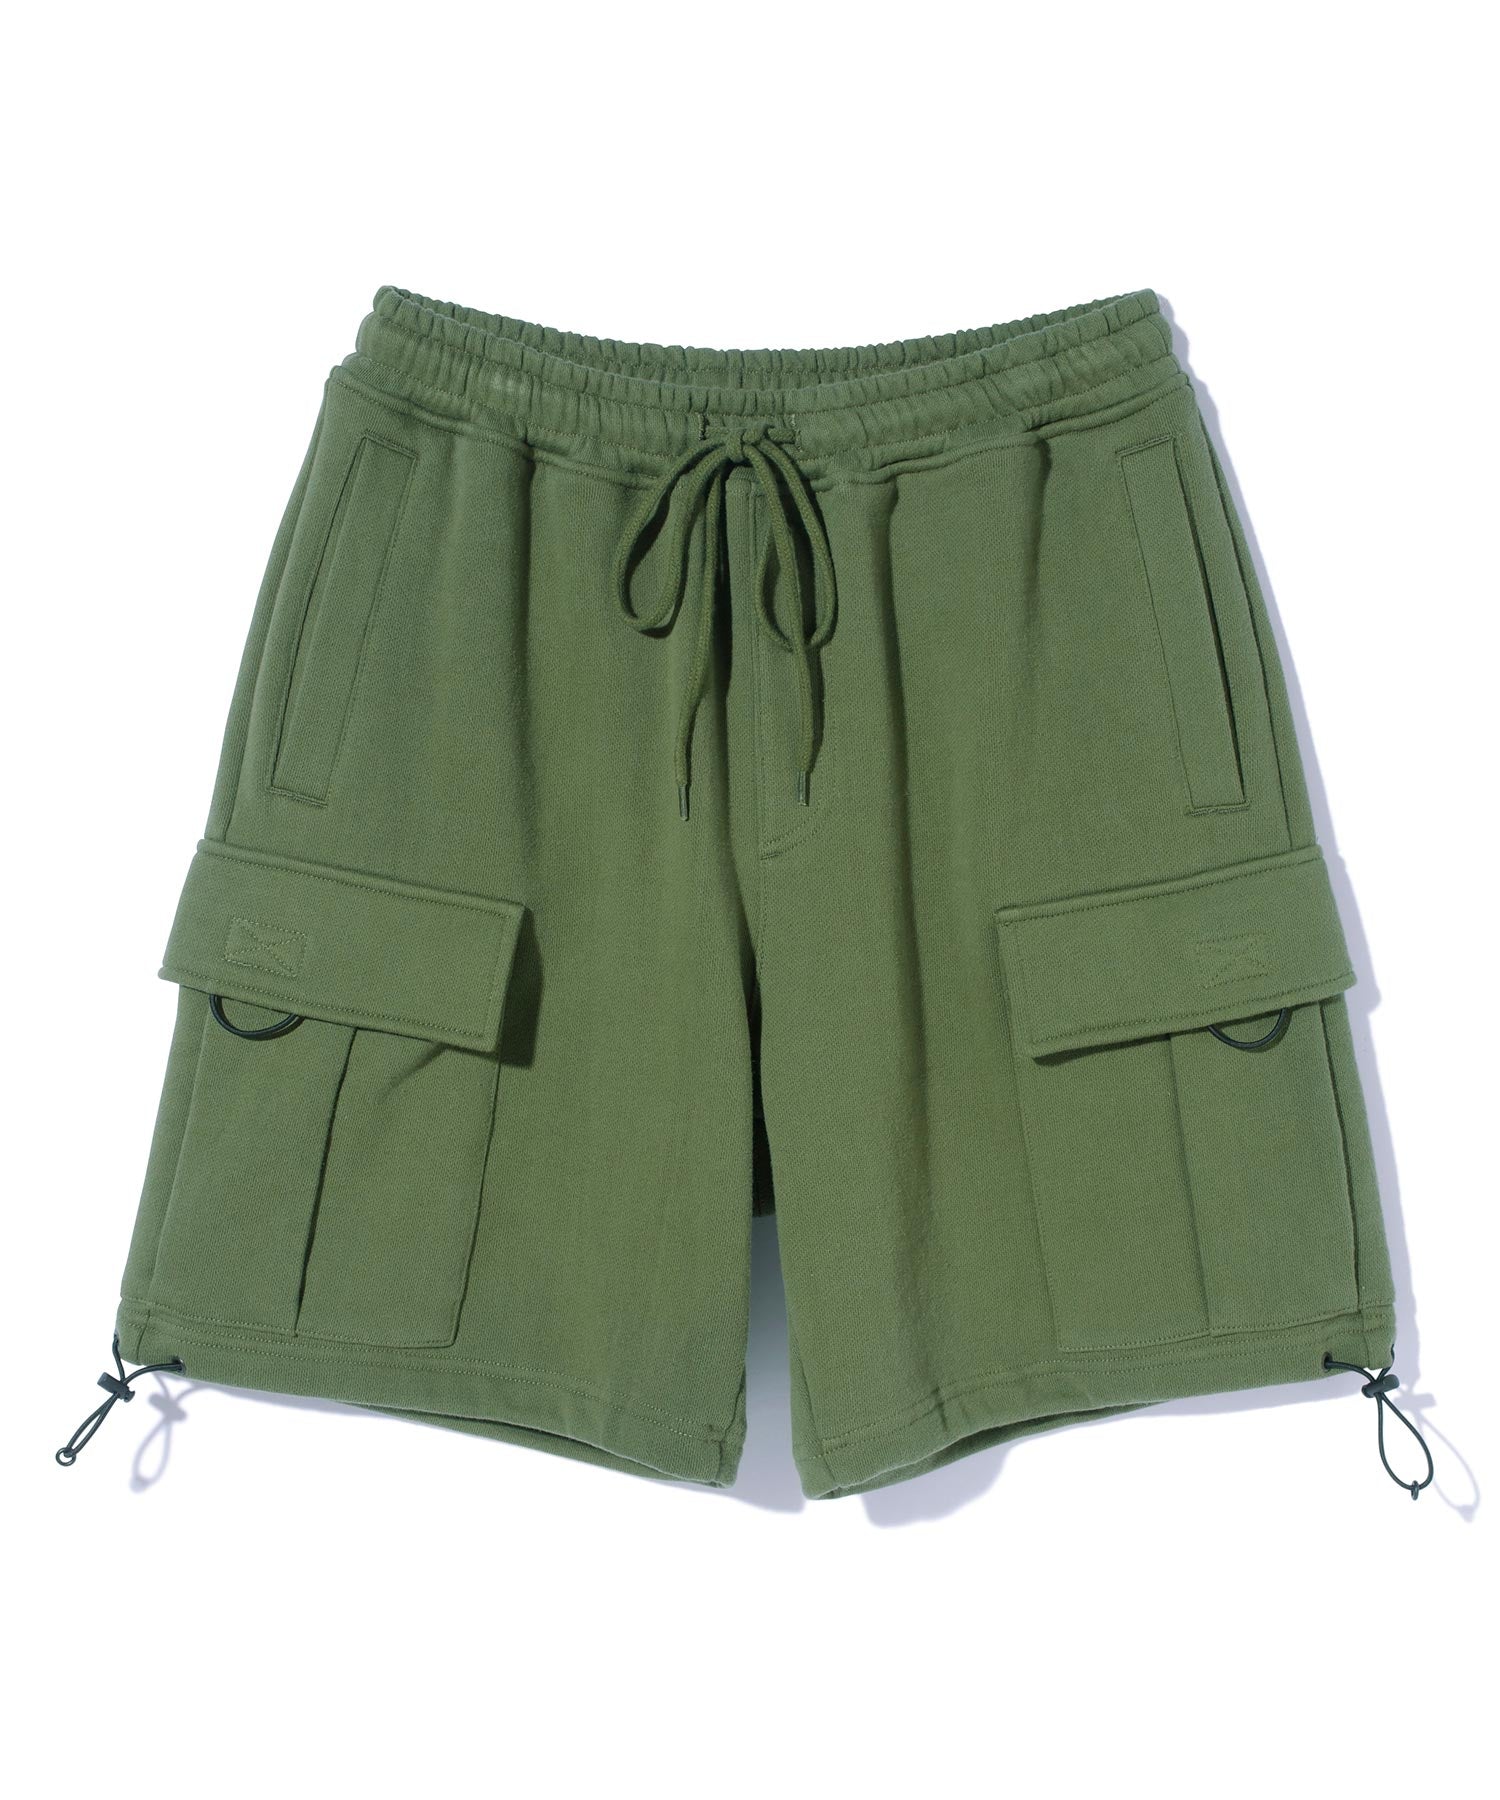 Skateboard Frog Women Baggy Cargo Shorts Bermuda Casual Sports Wide Leg Short  Pants with Pockets (ArmyGreen,S) at Amazon Women's Clothing store